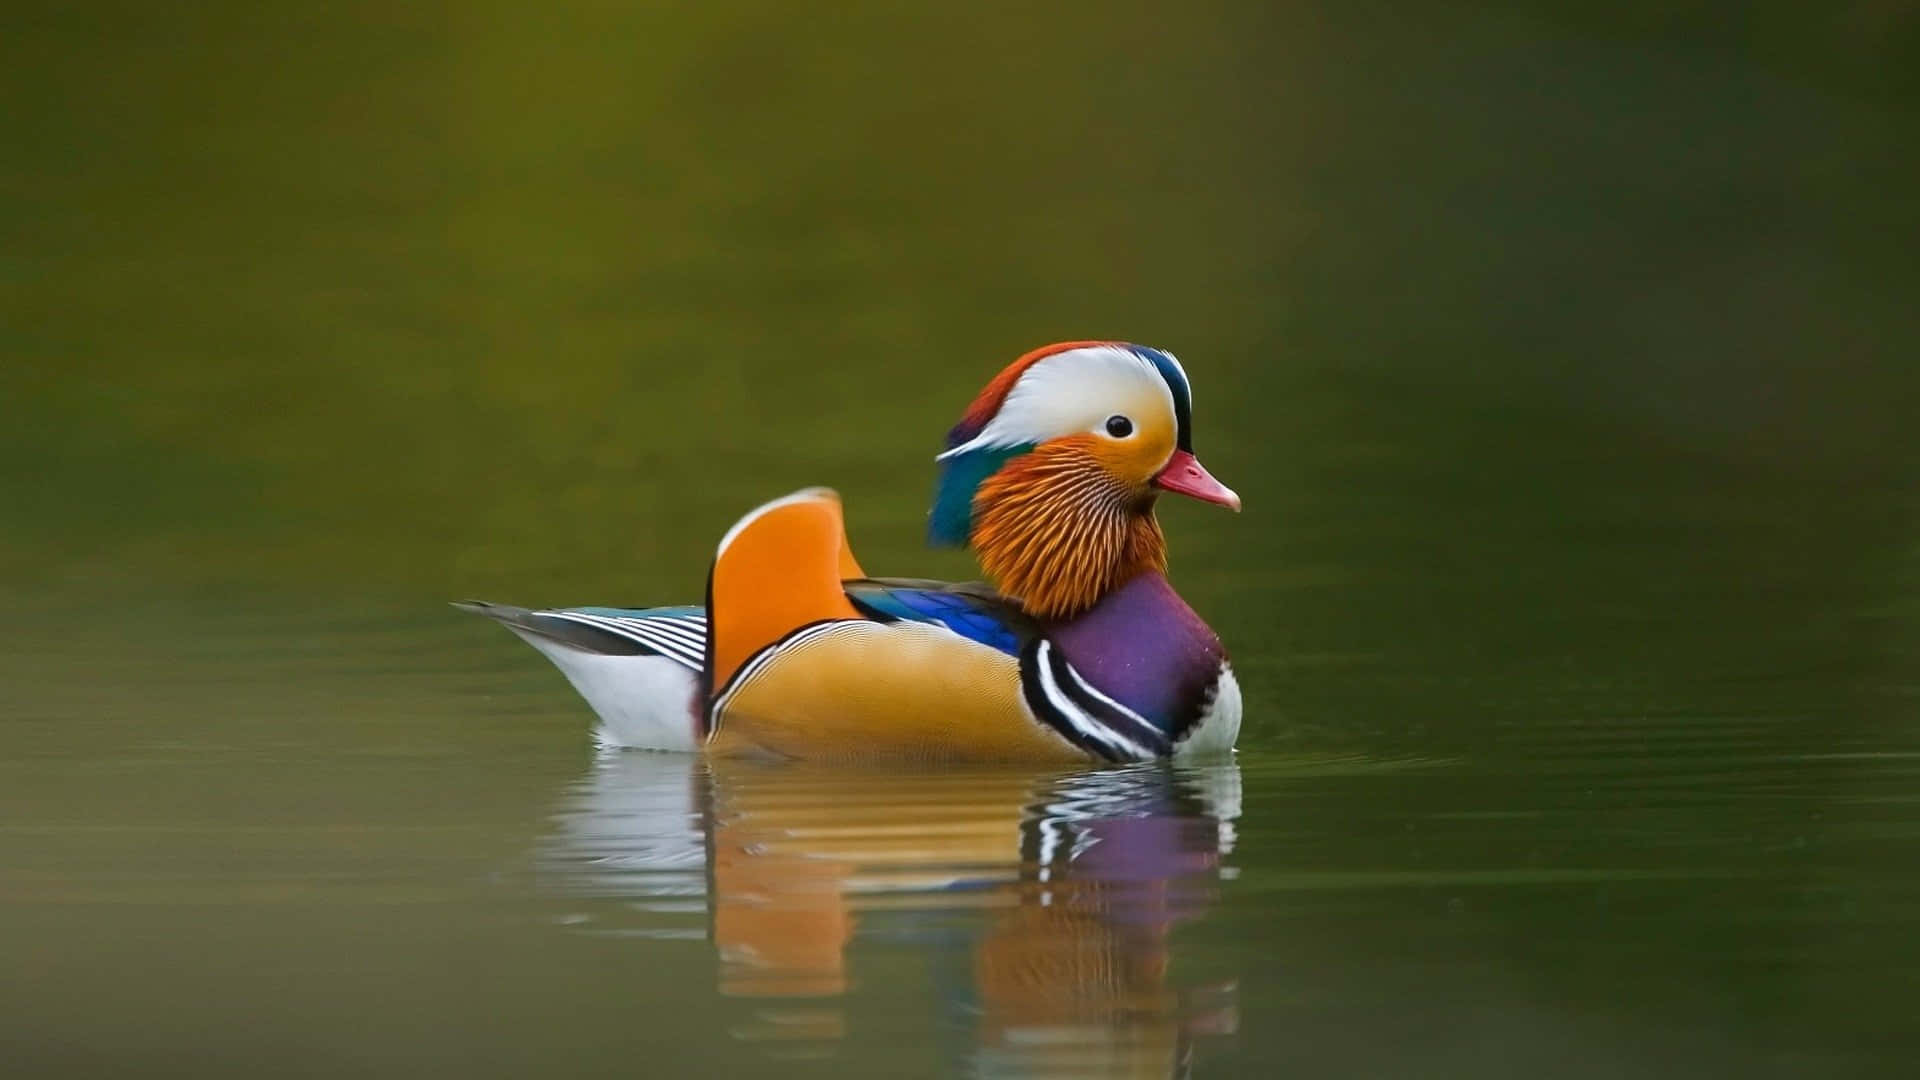 Look at this adorable duck! Wallpaper